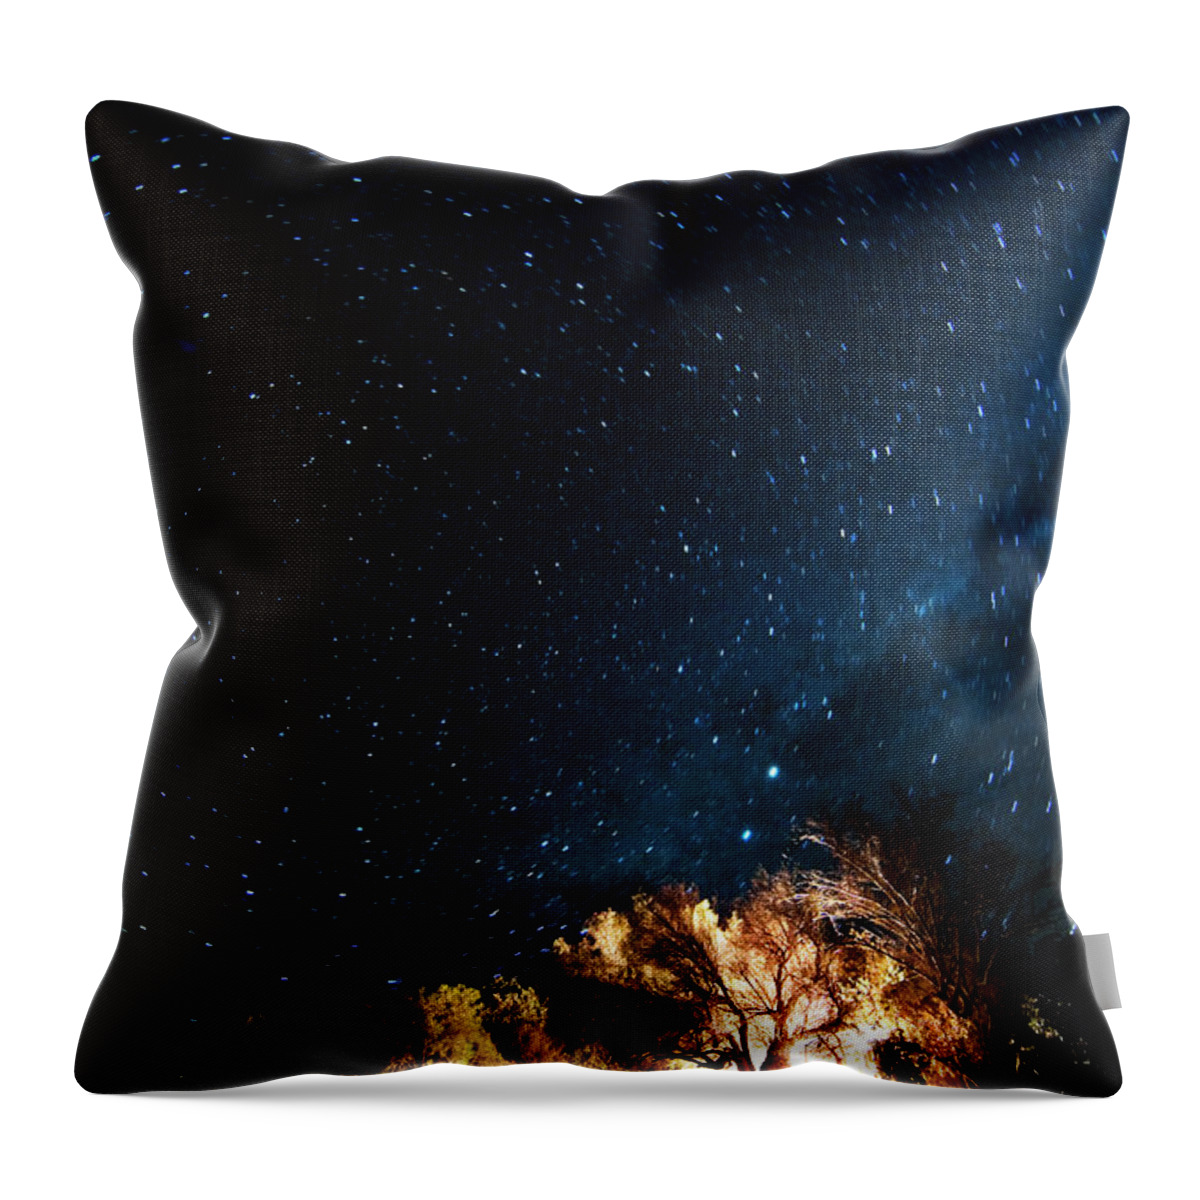 Northern Cape Province Throw Pillow featuring the photograph Farm House And Milky Way by Subman